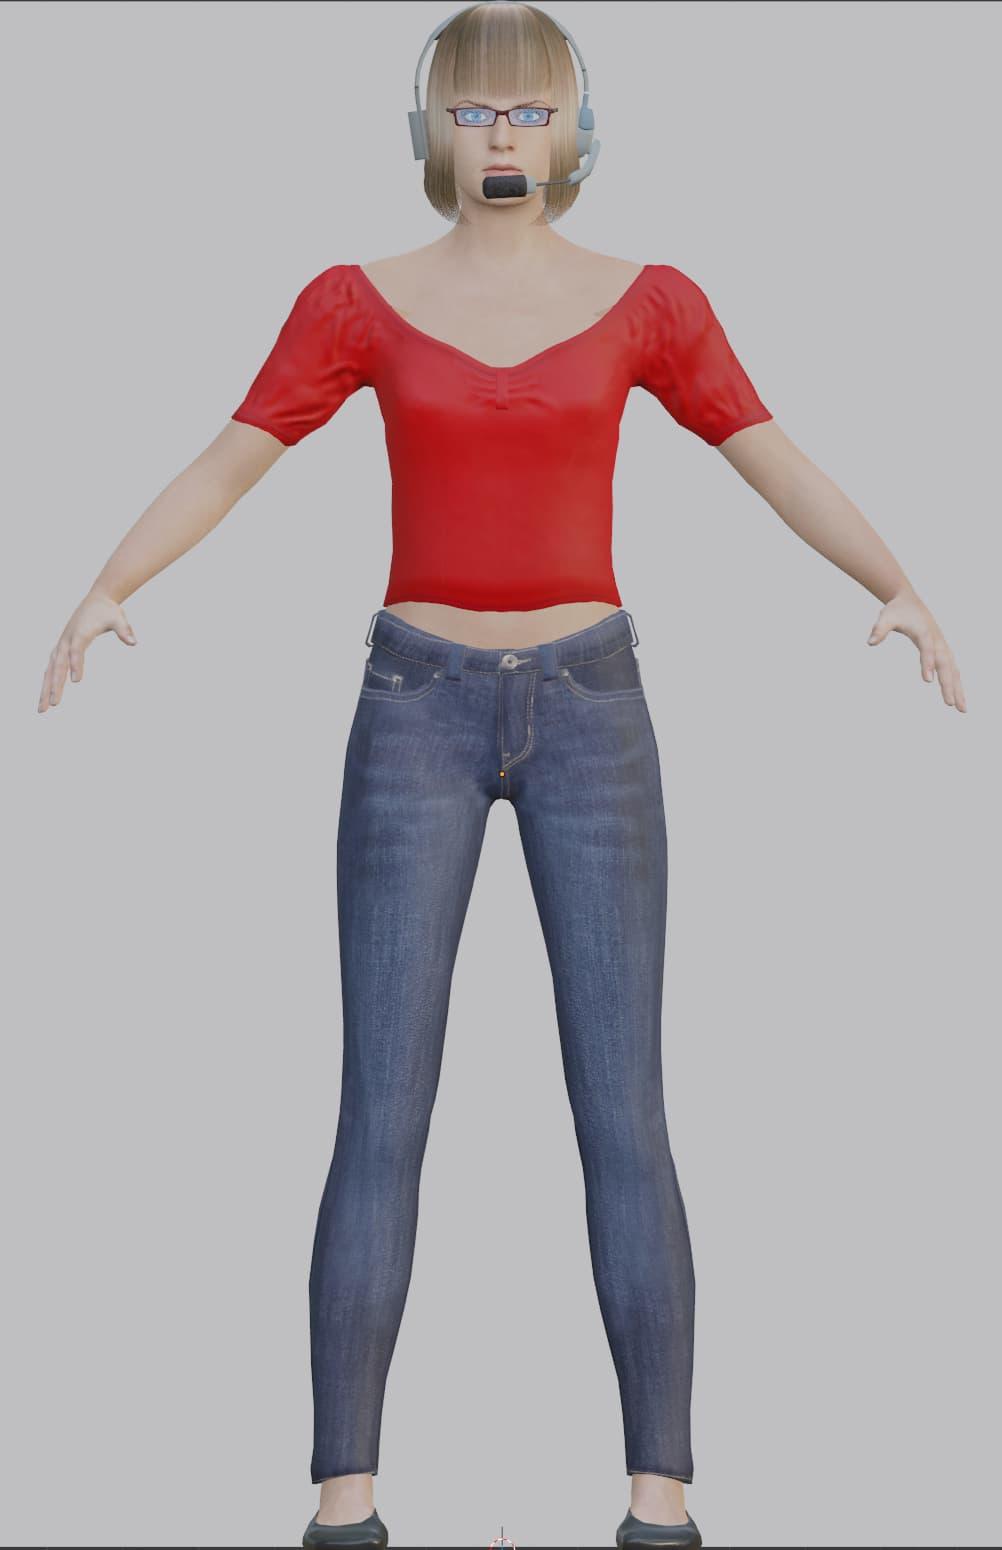 Front view of a 3D model of a blonde woman in a red shirt and blue jeans, wearing glasses and a headset, in an A pose